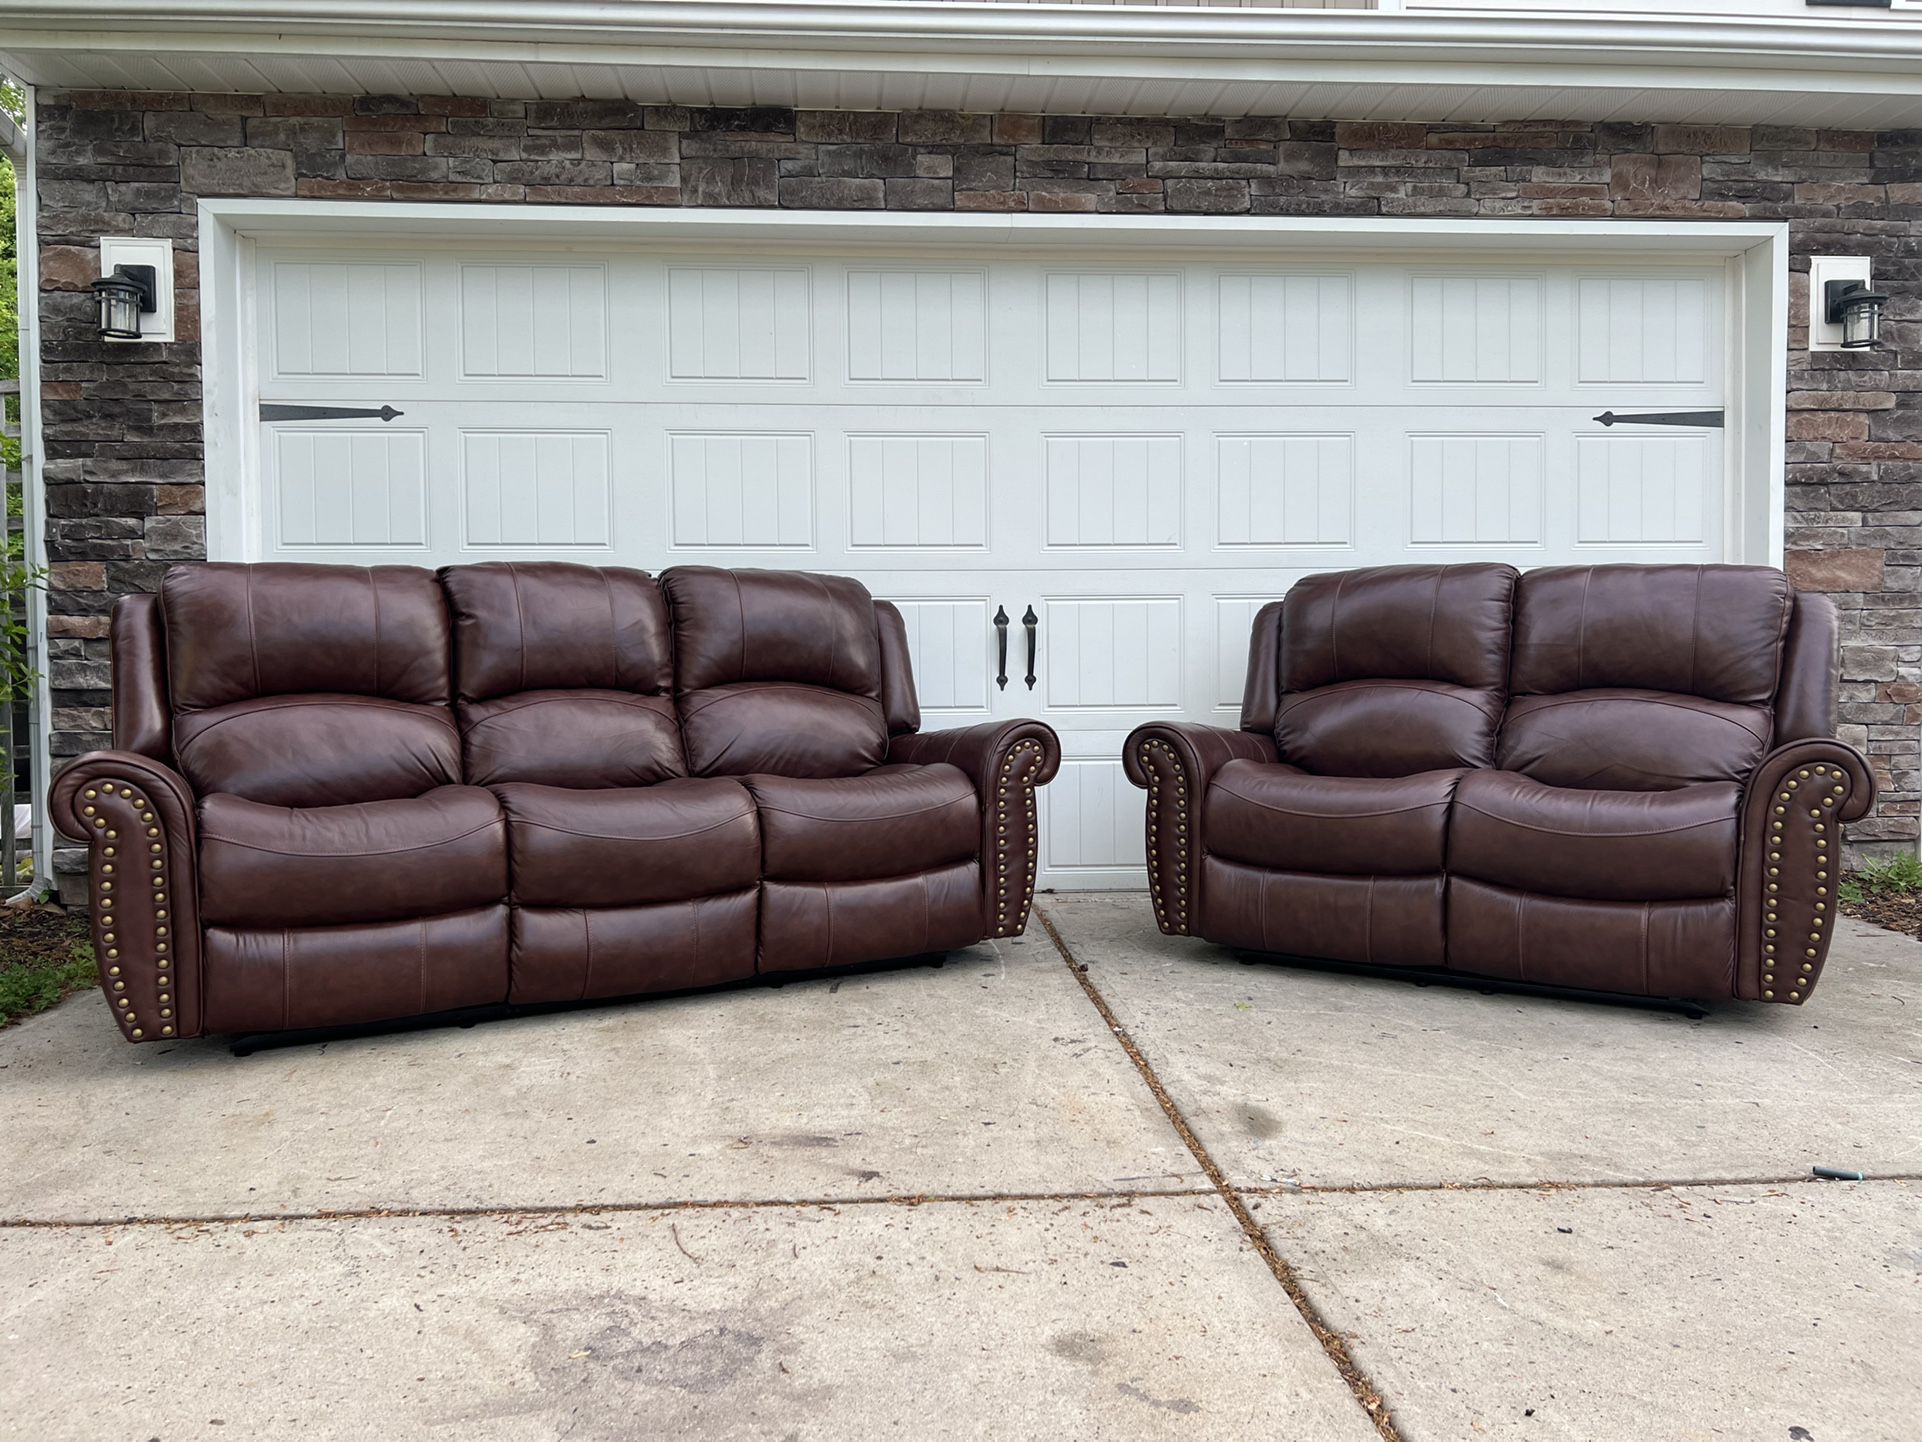 Top Grain Leather Nail Head trim Reclining Set, Like New! (Free Delivery!)